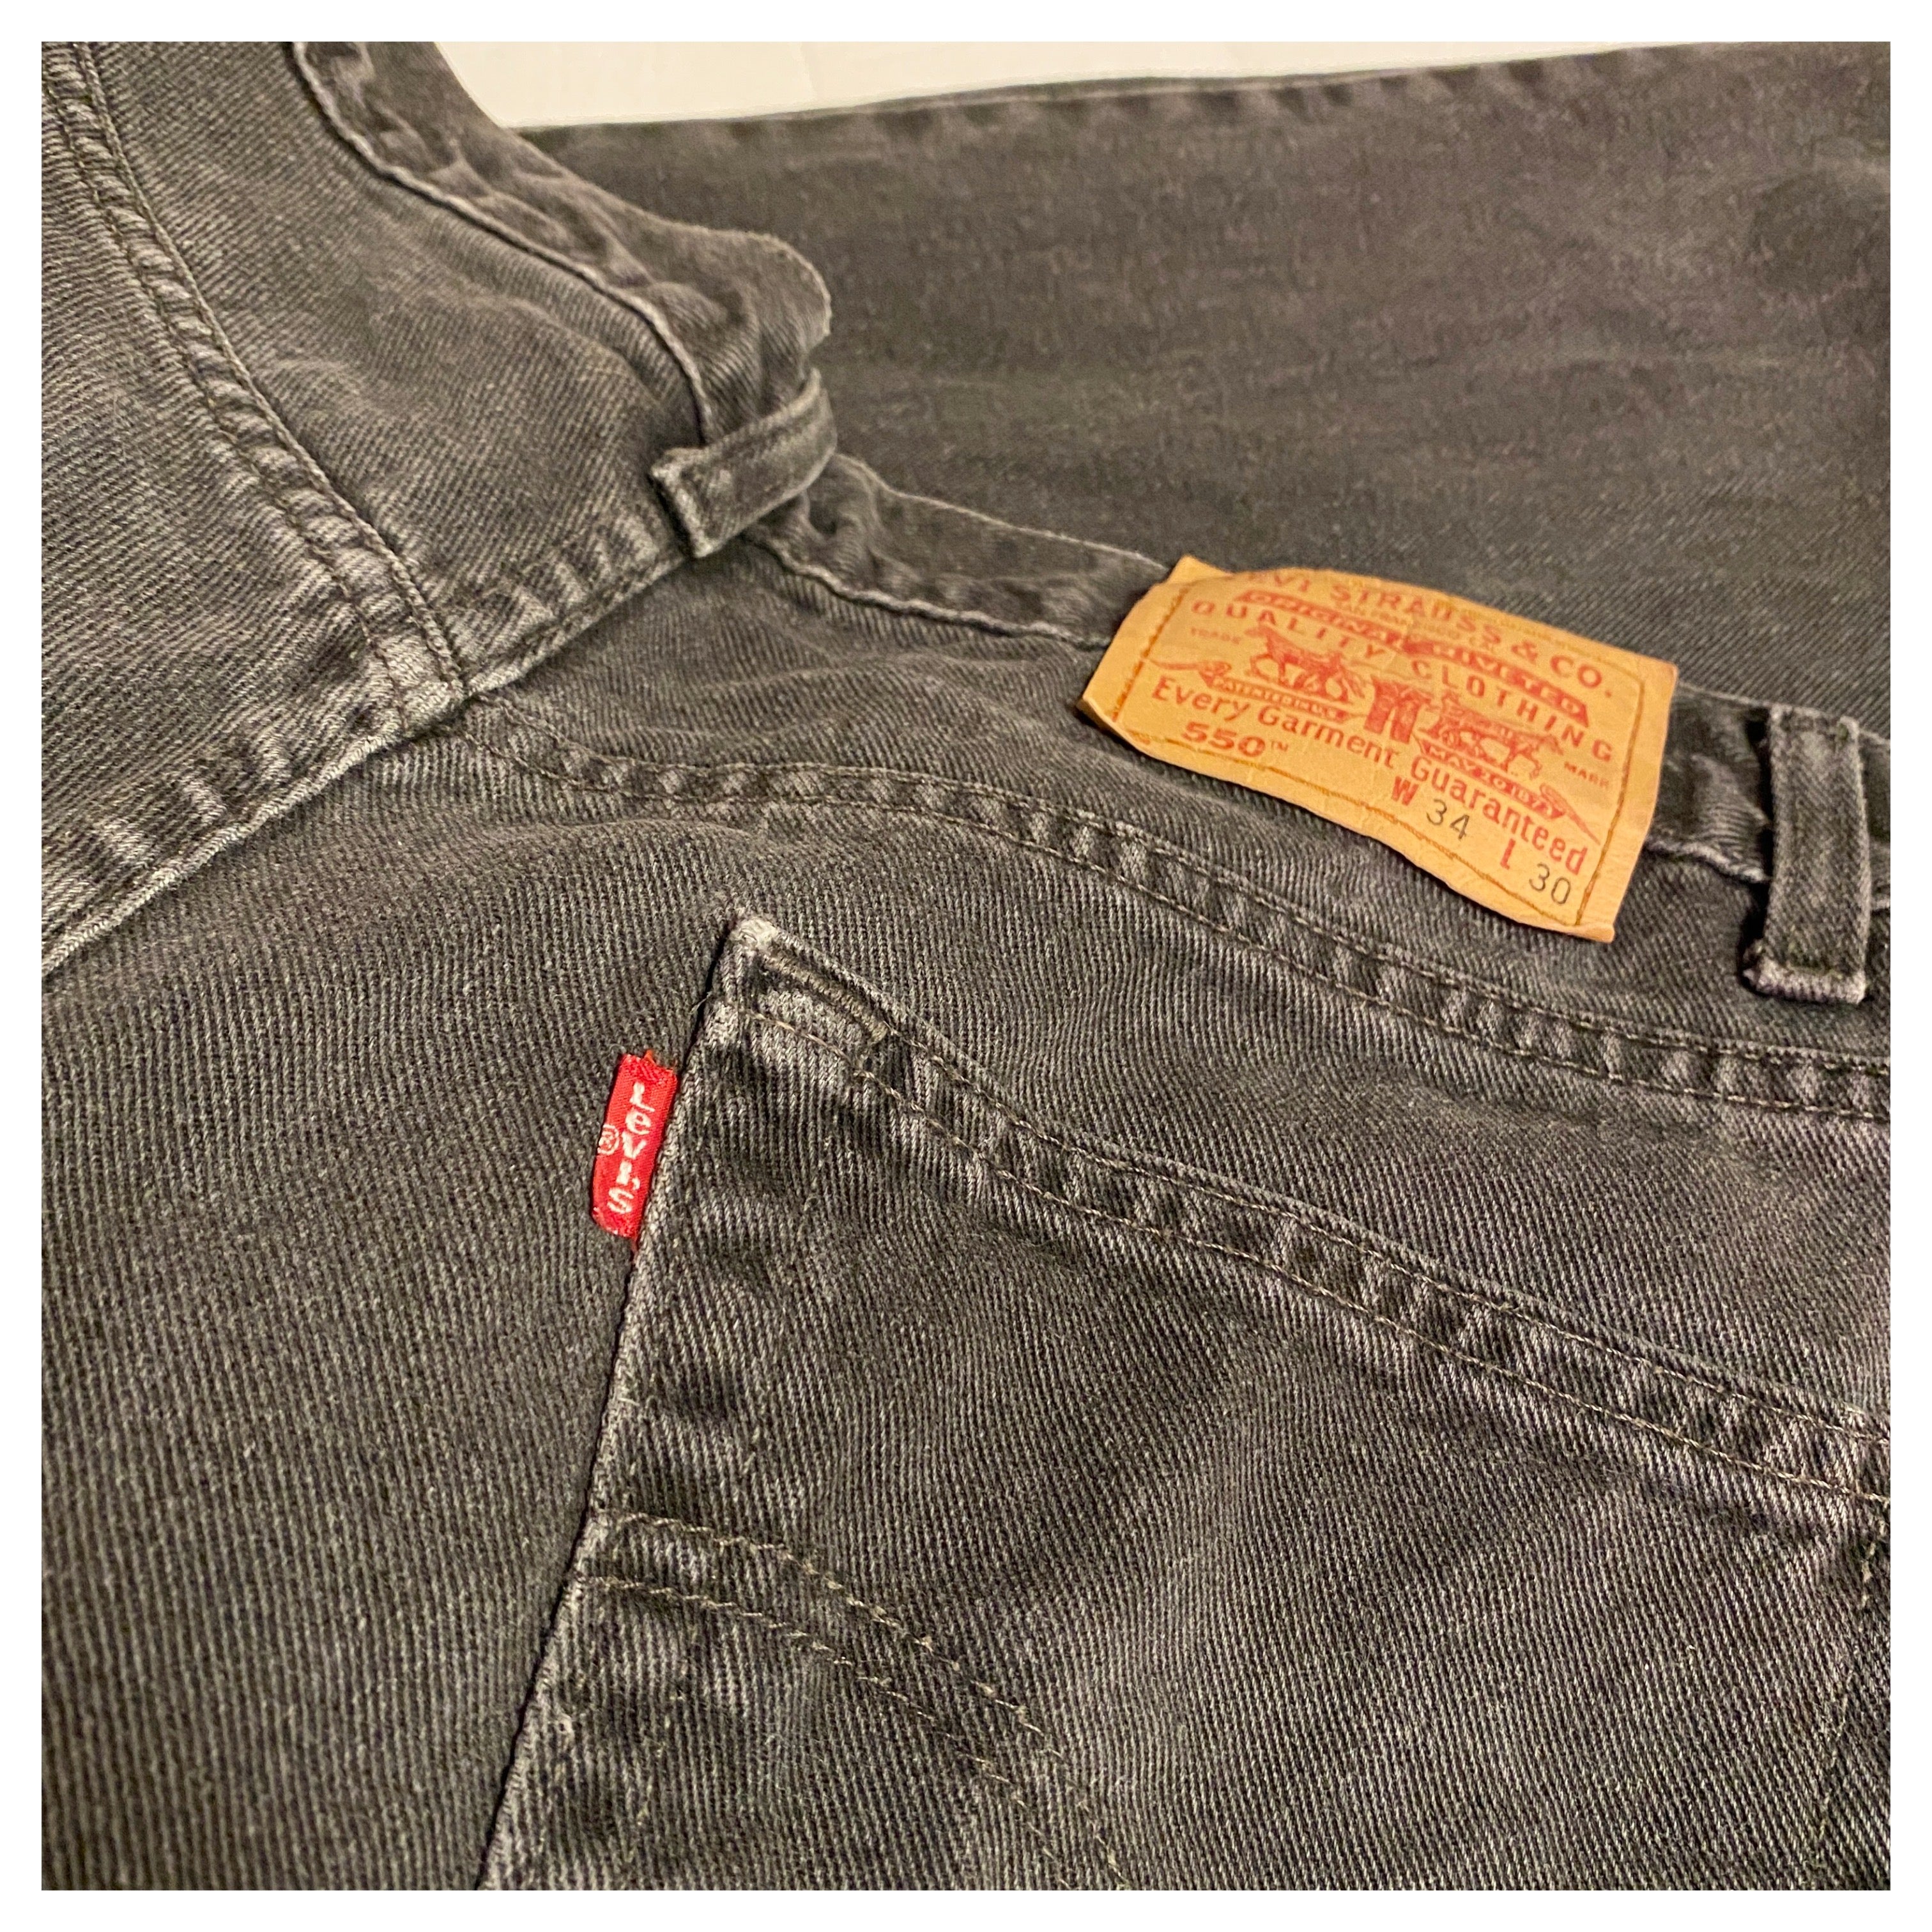 LEVI’S RELAXED FIT DAD JEANS sz. 34x30